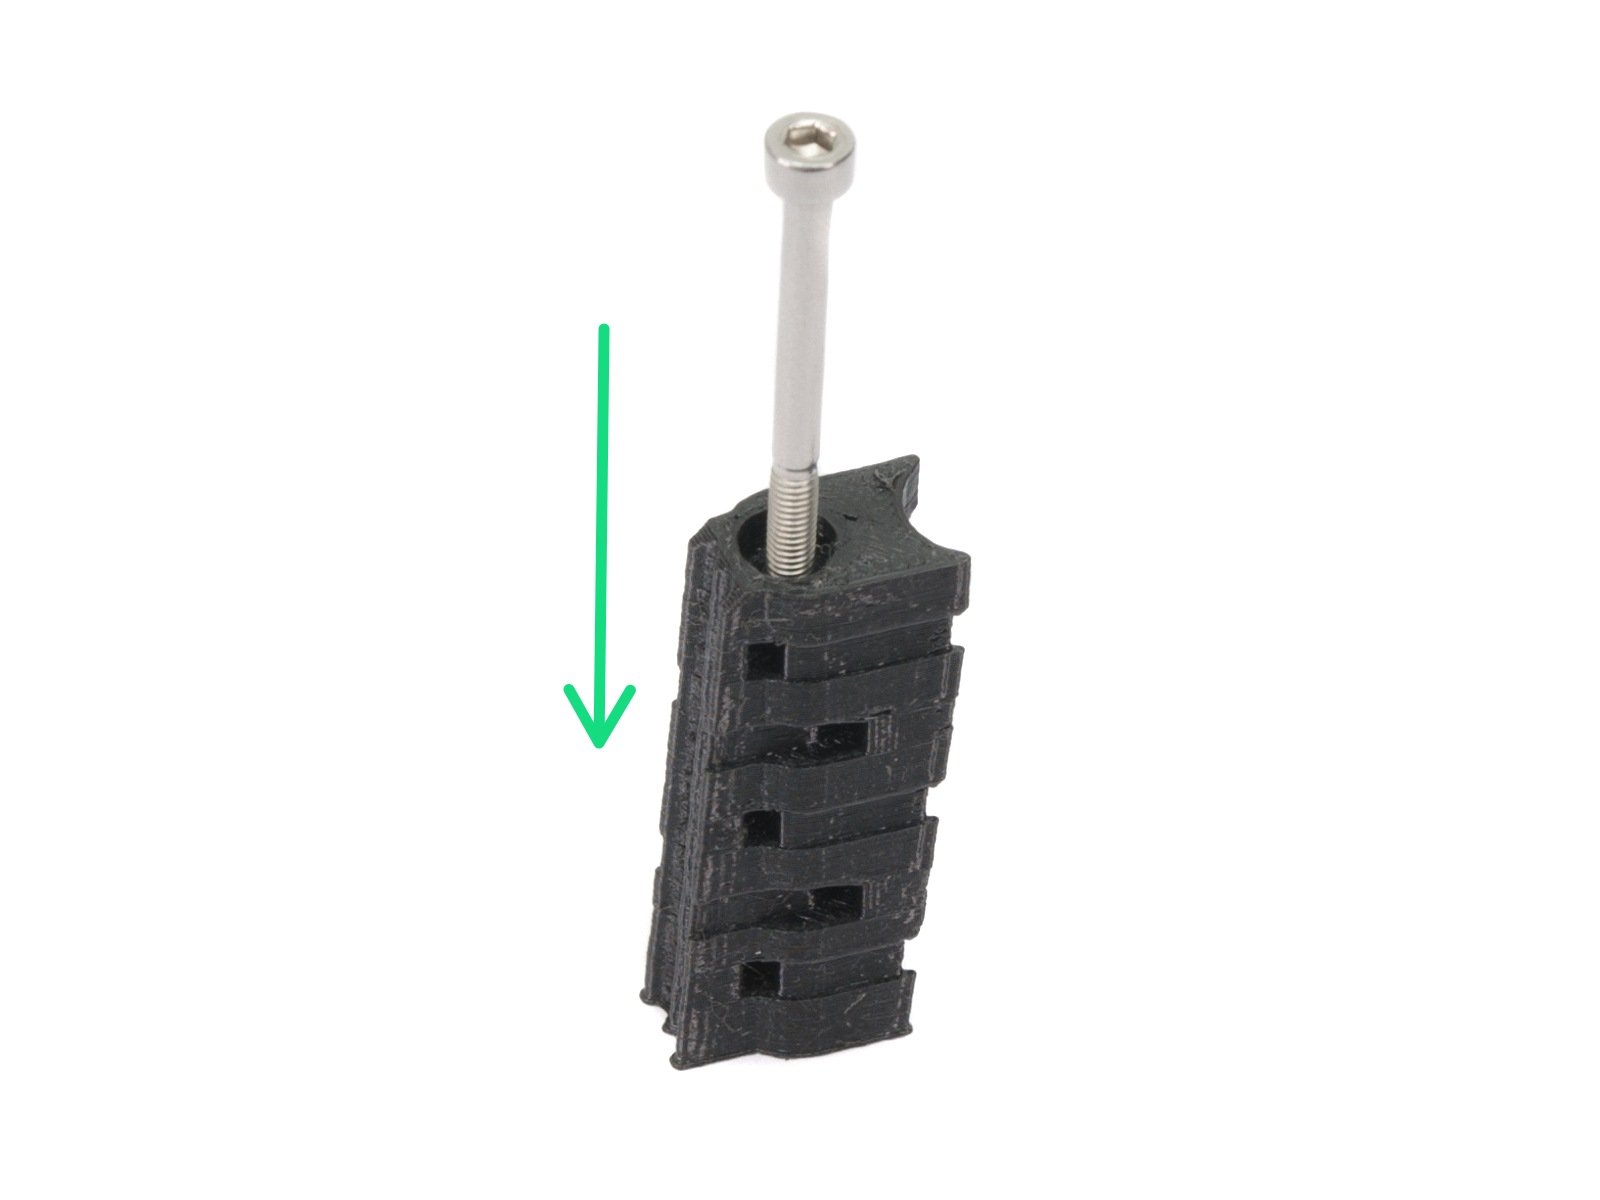 Cable-holder assembly